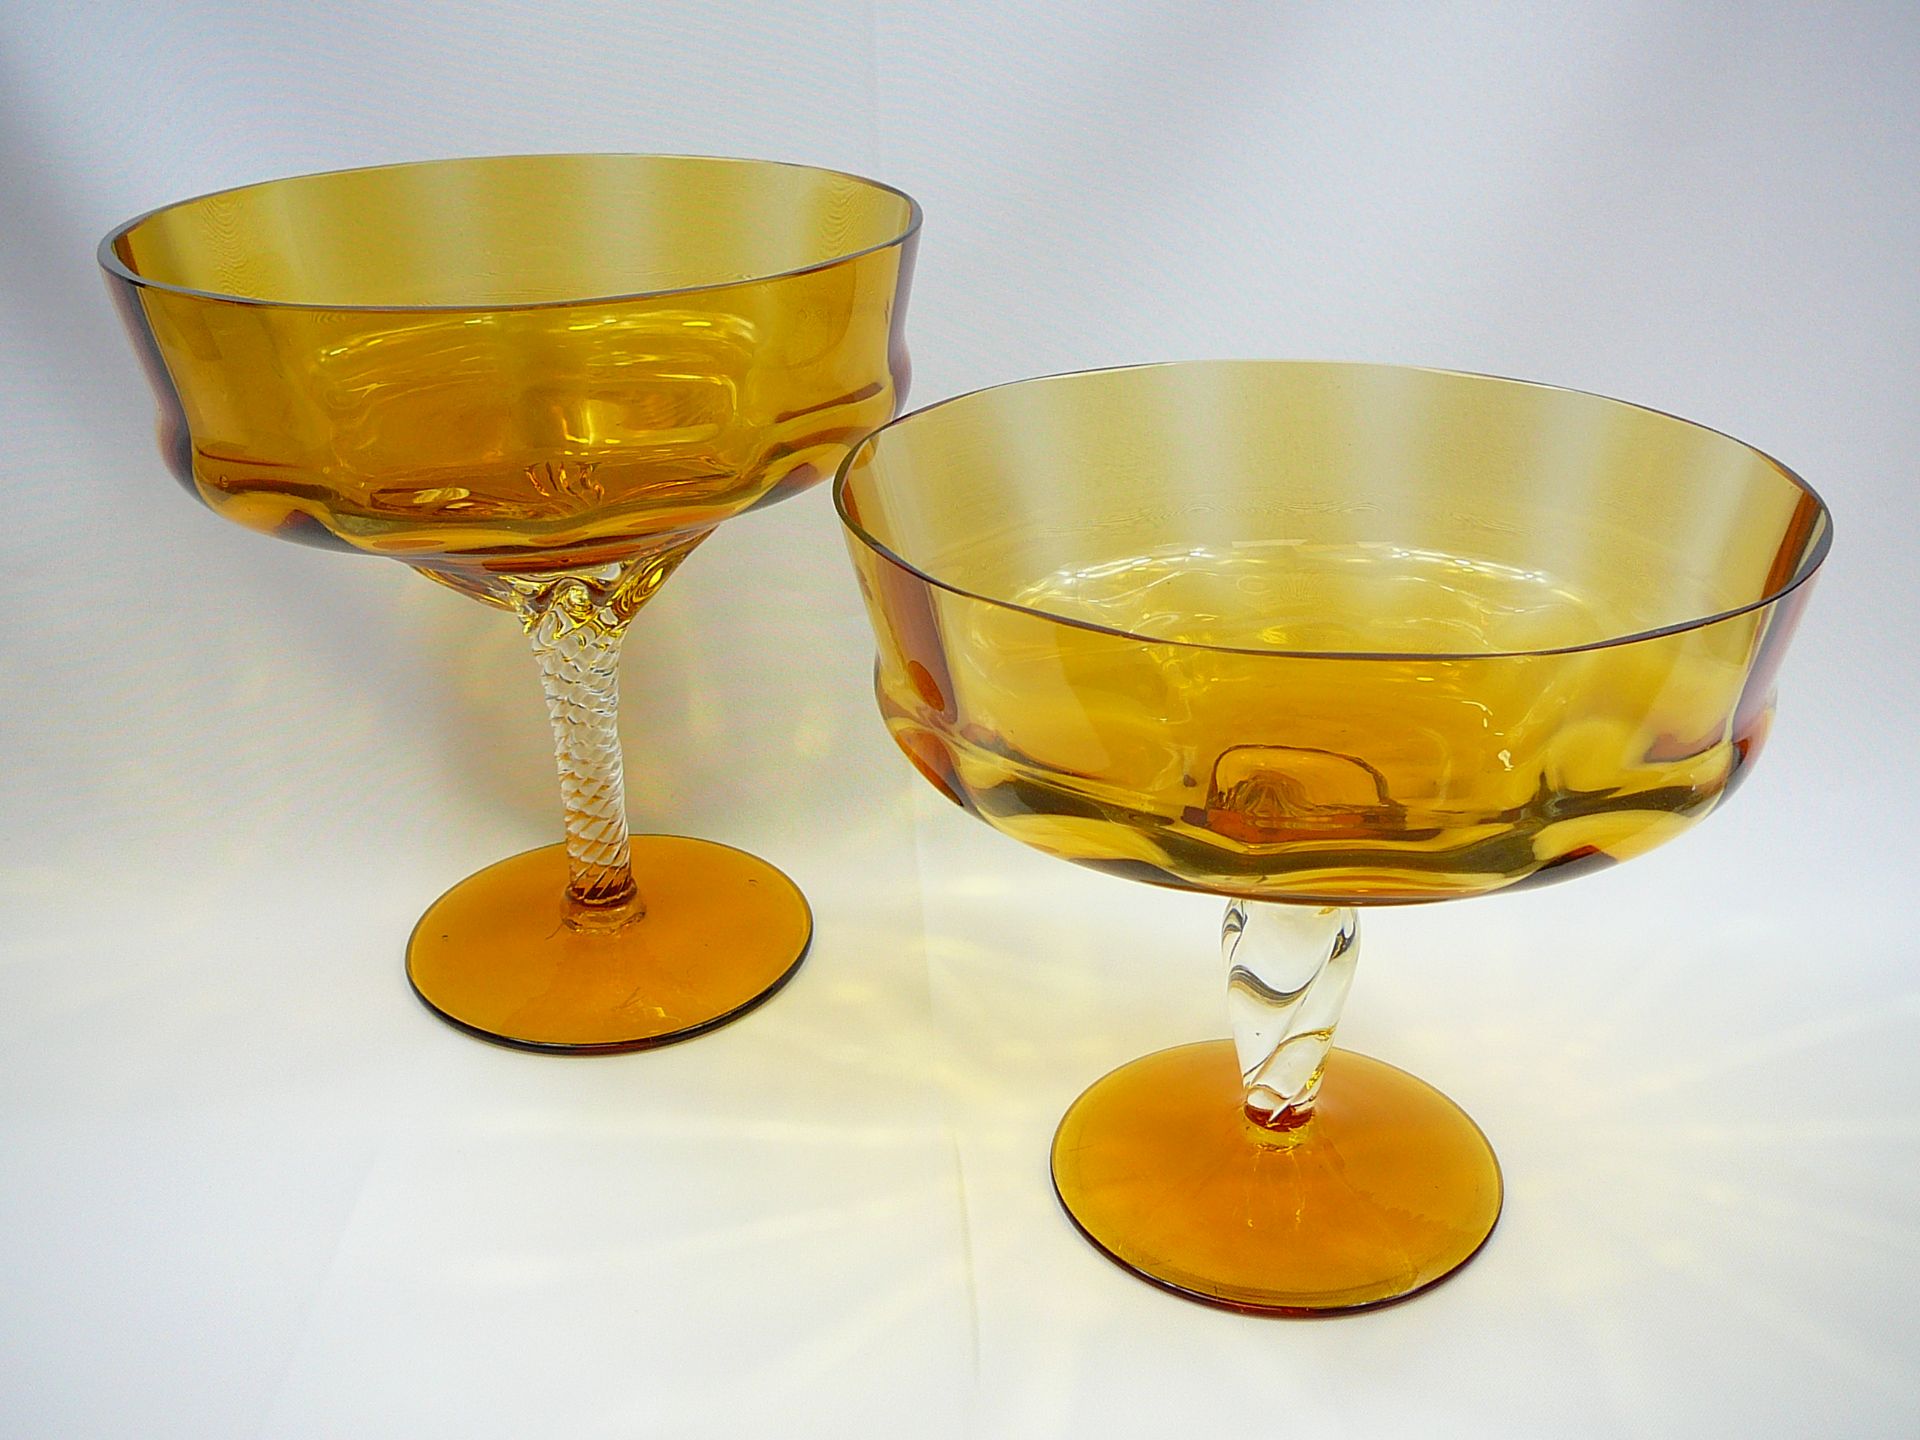 Pair of amber glass graduated tazzas - Image 3 of 3